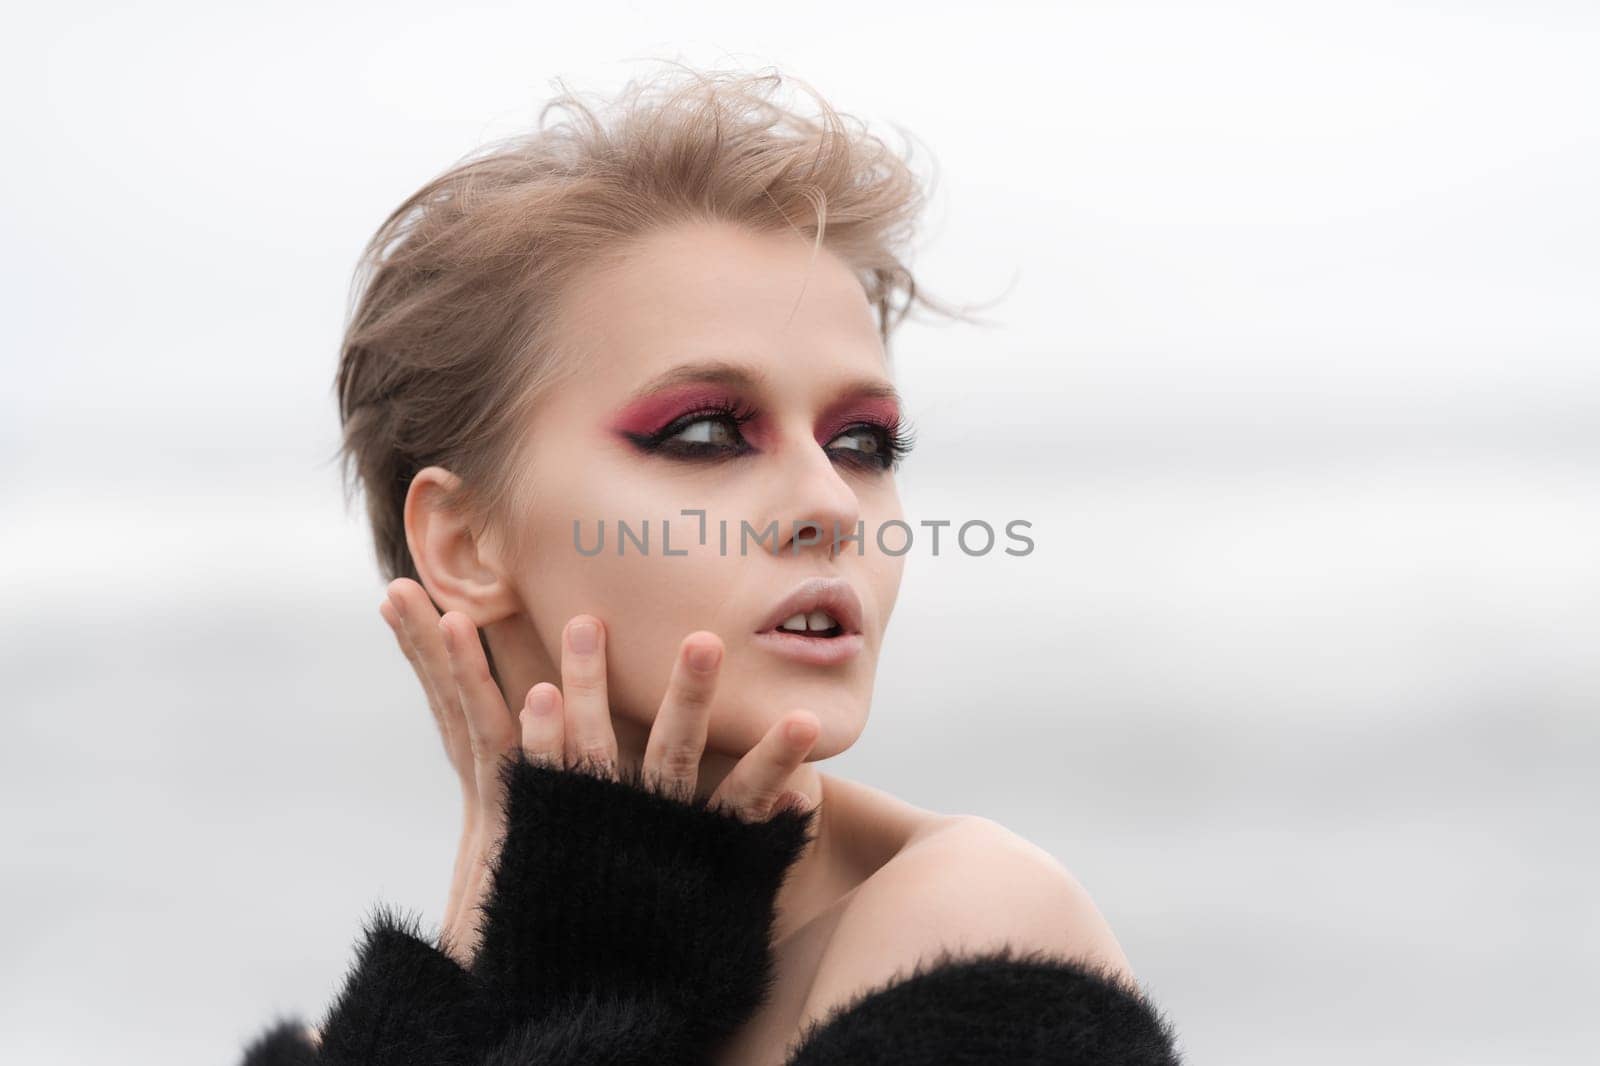 Portrait blonde woman fashion model looking away, posing outdoors on white natural background. Face of Caucasian woman with short hair, bright makeup. Soft selective focus adds to overall dreamy vibe